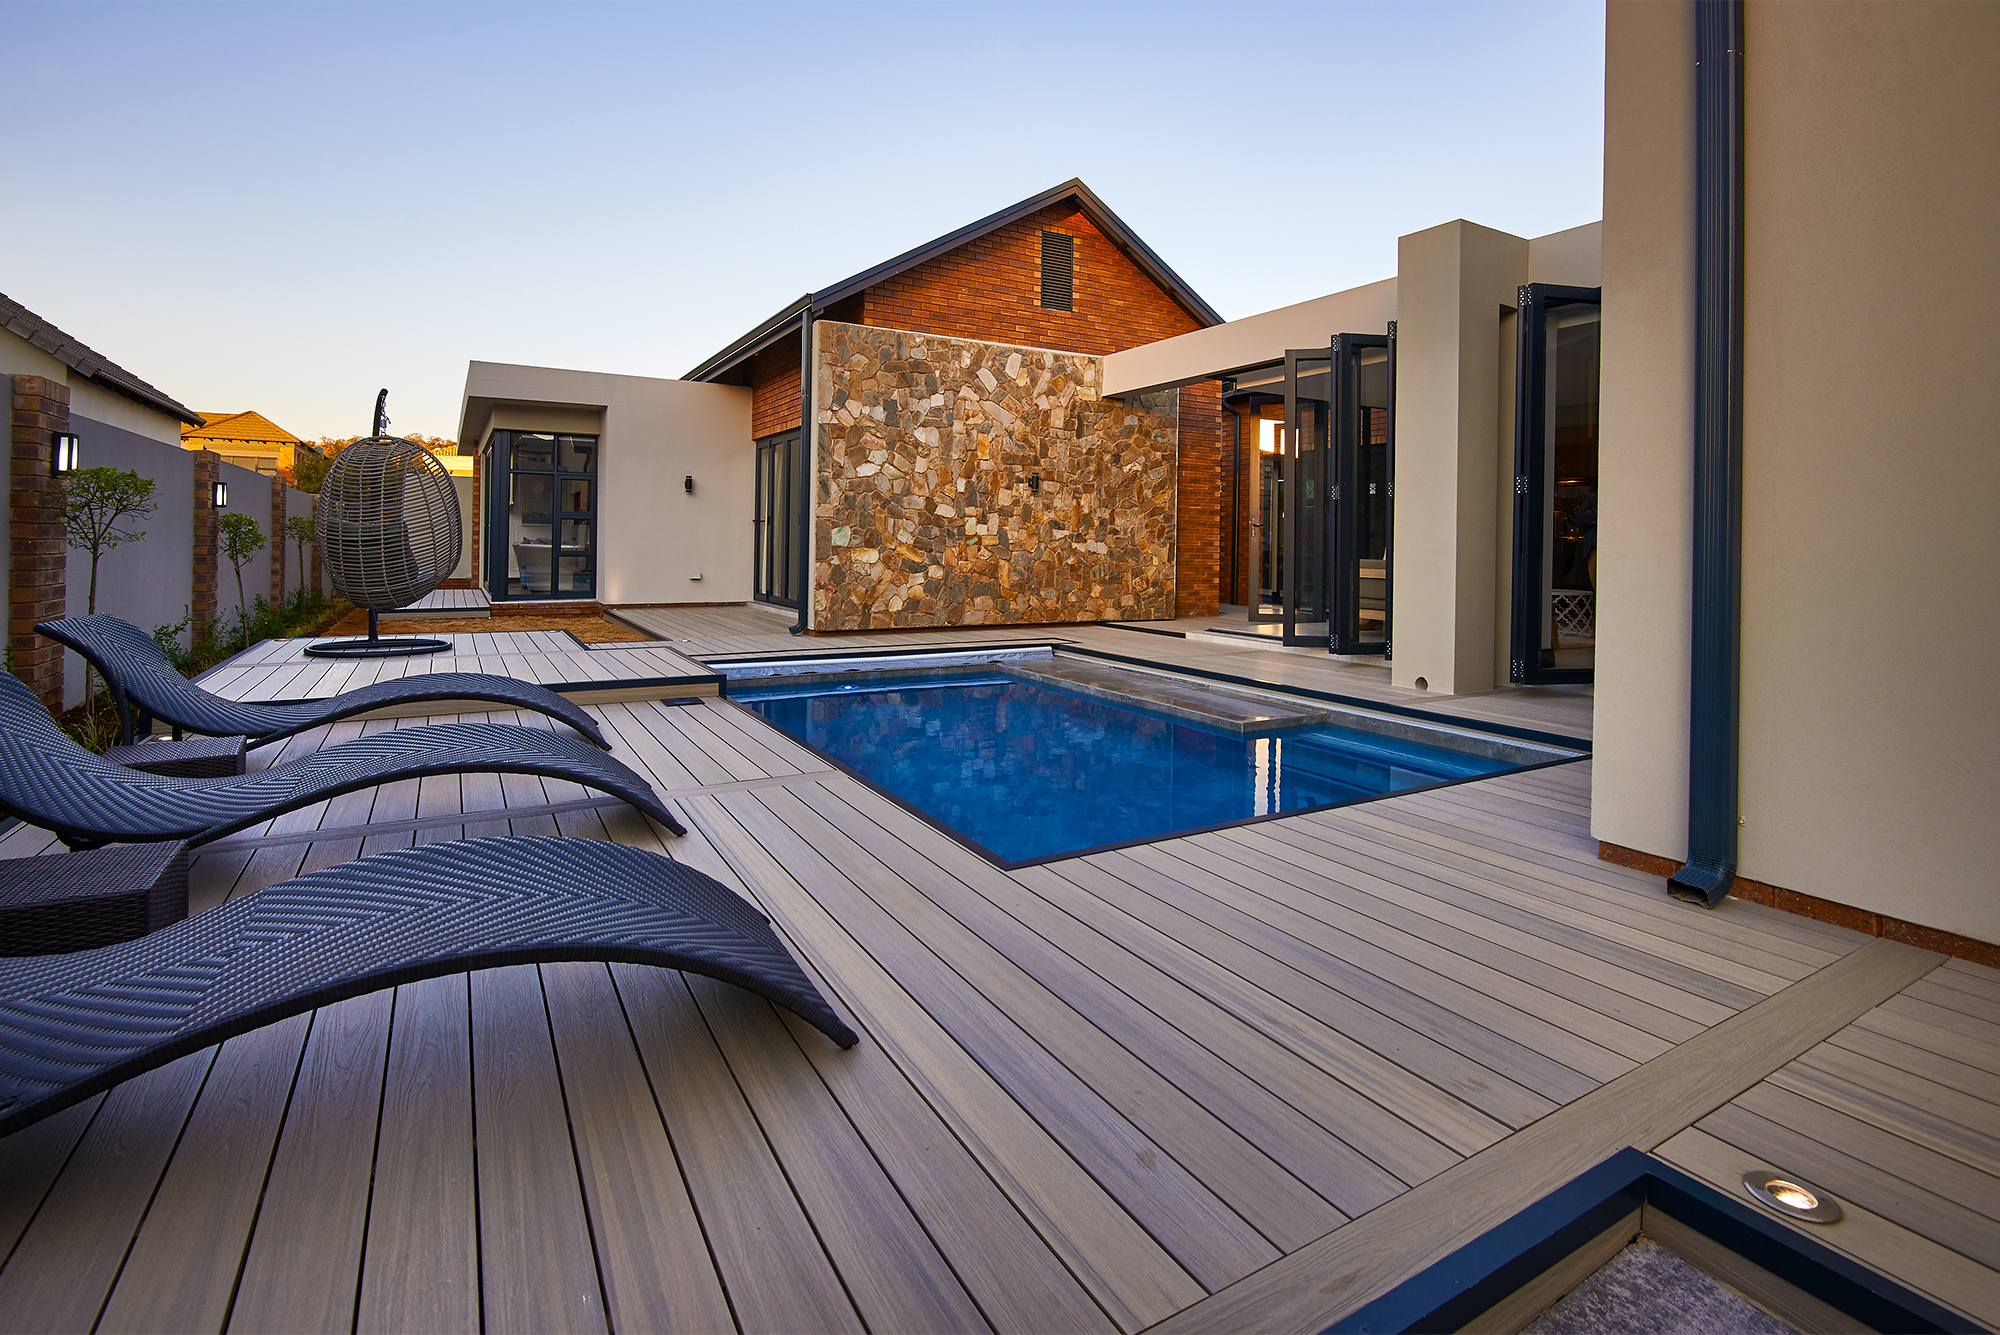 Pro Tips For Designing An Aesthetic Pool Area